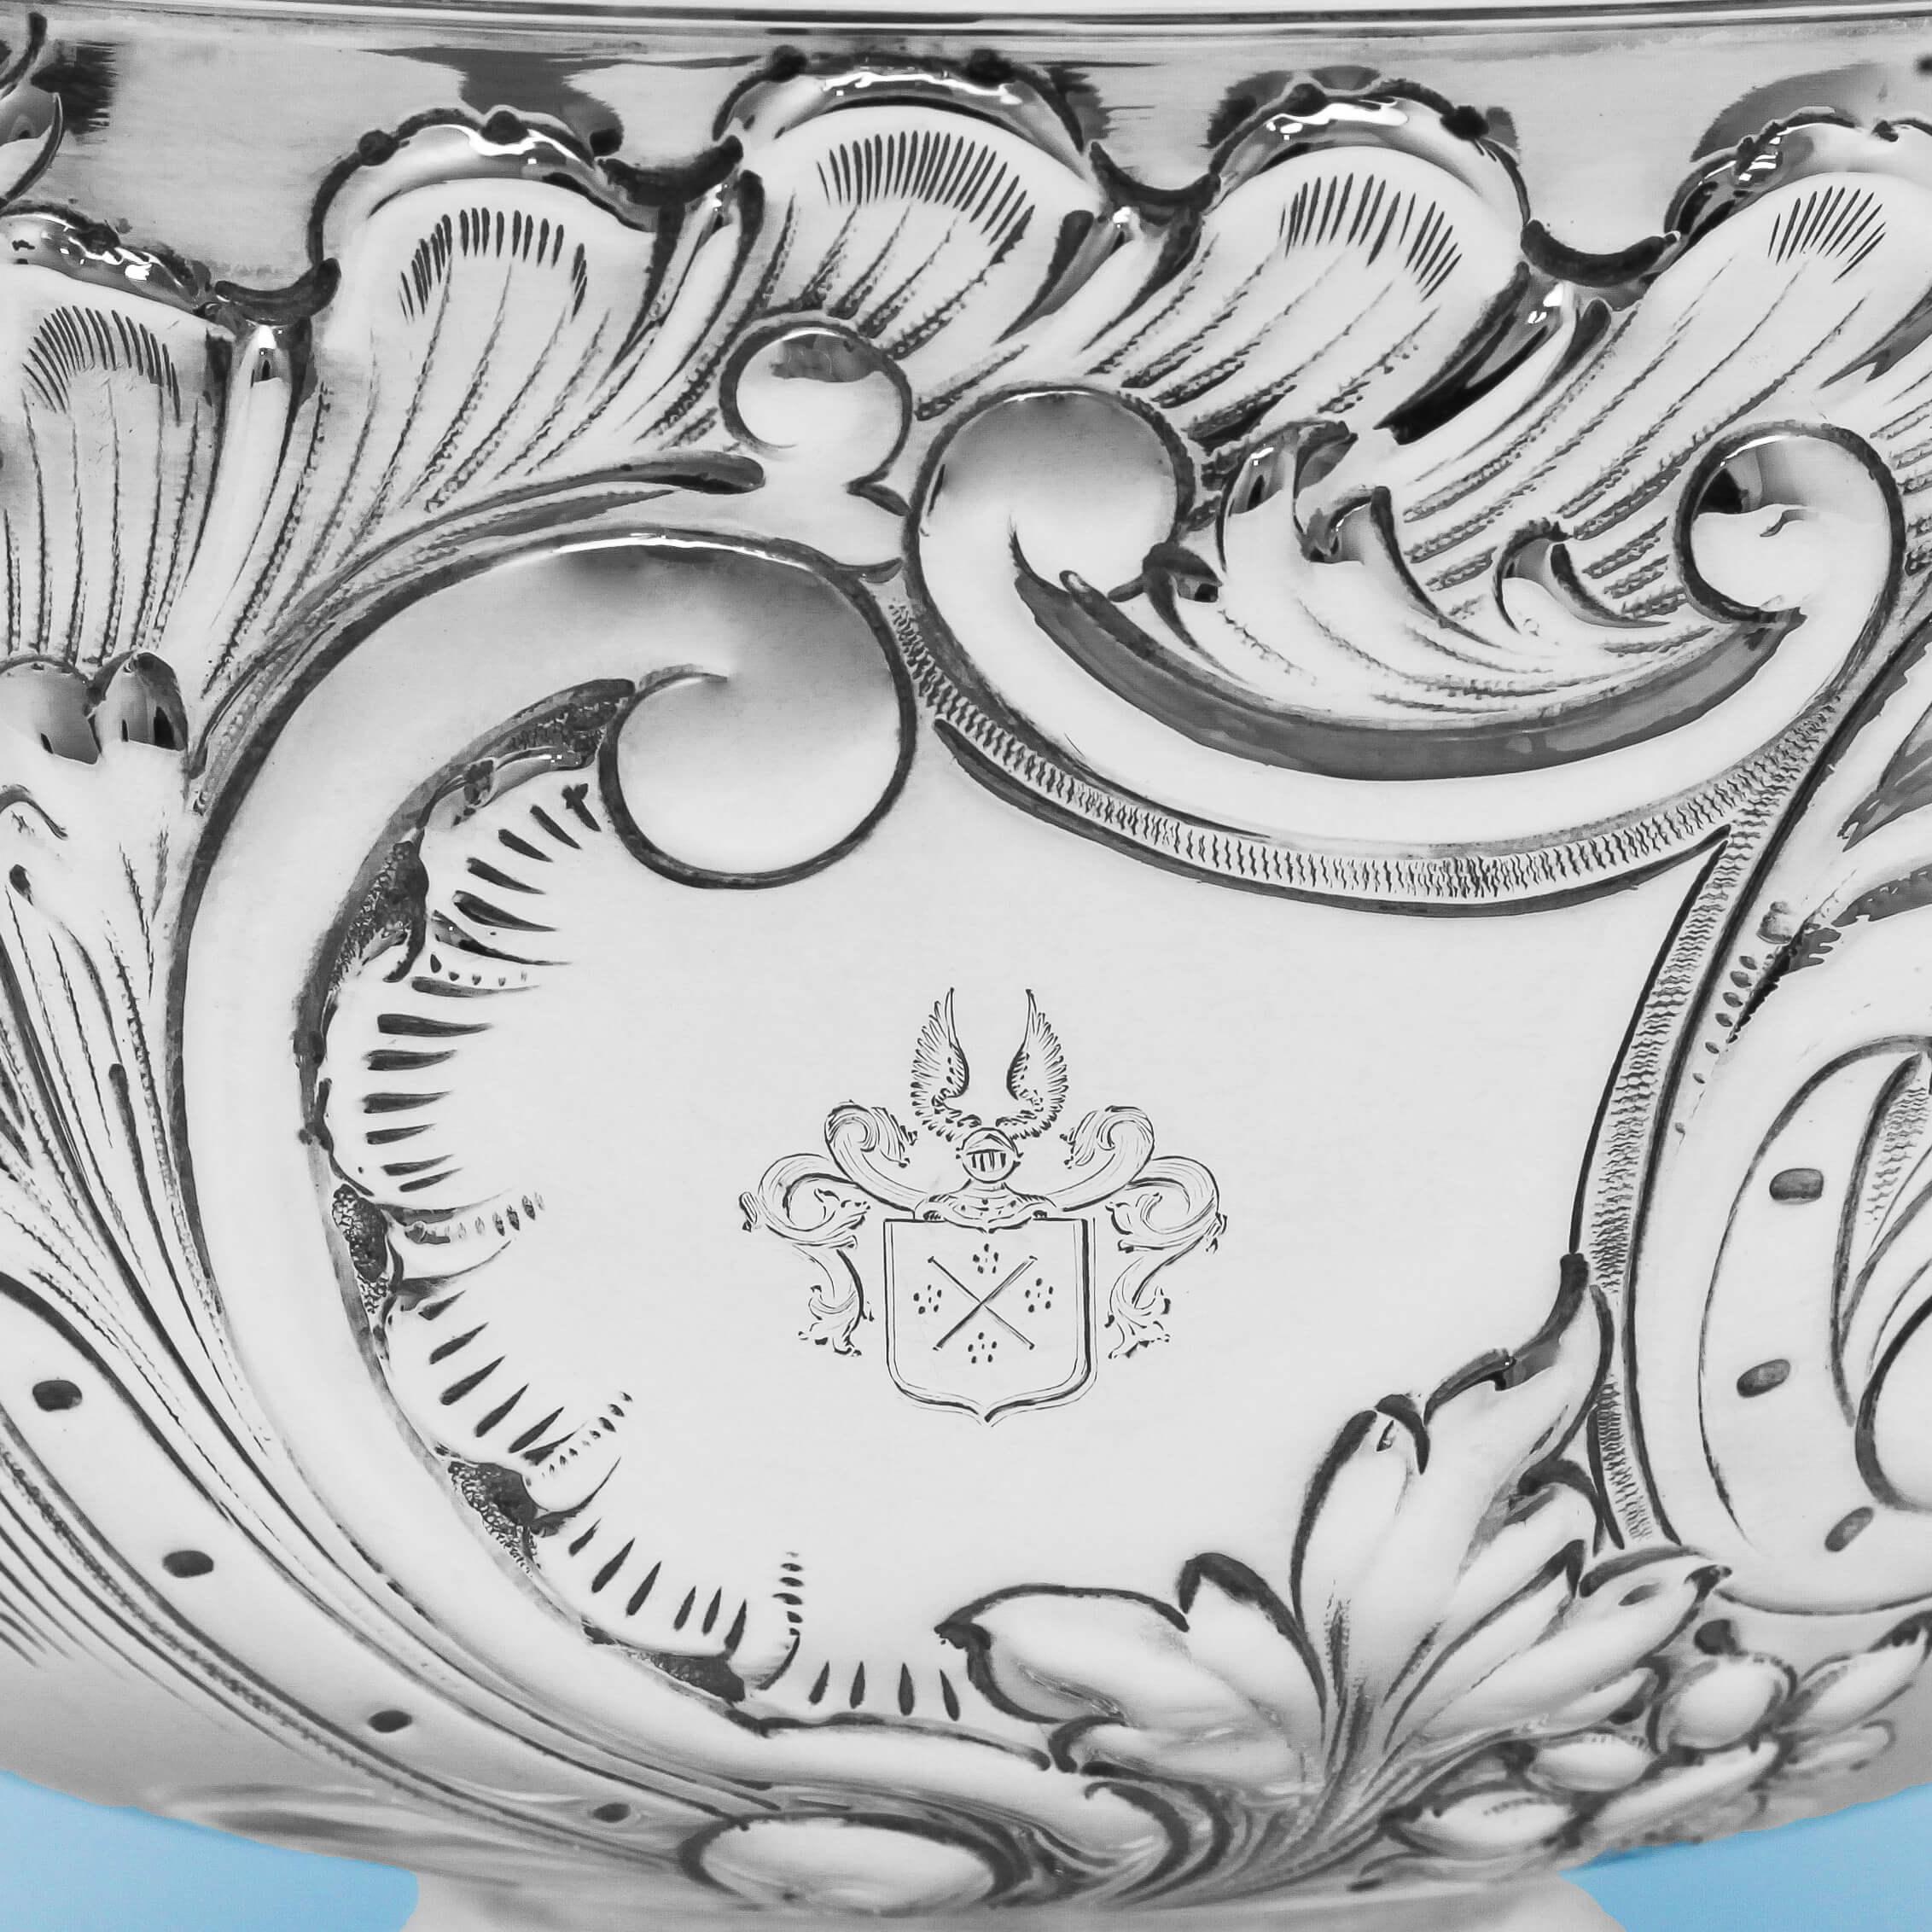 Hallmarked in London in 1897 by Fordham & Faulkner, this attractive, Antique, Victorian, Sterling Silver Bowl stands on a pedestal foot and features chased floral and scroll decoration to the body with reed borders around the foot and rim. The bowl